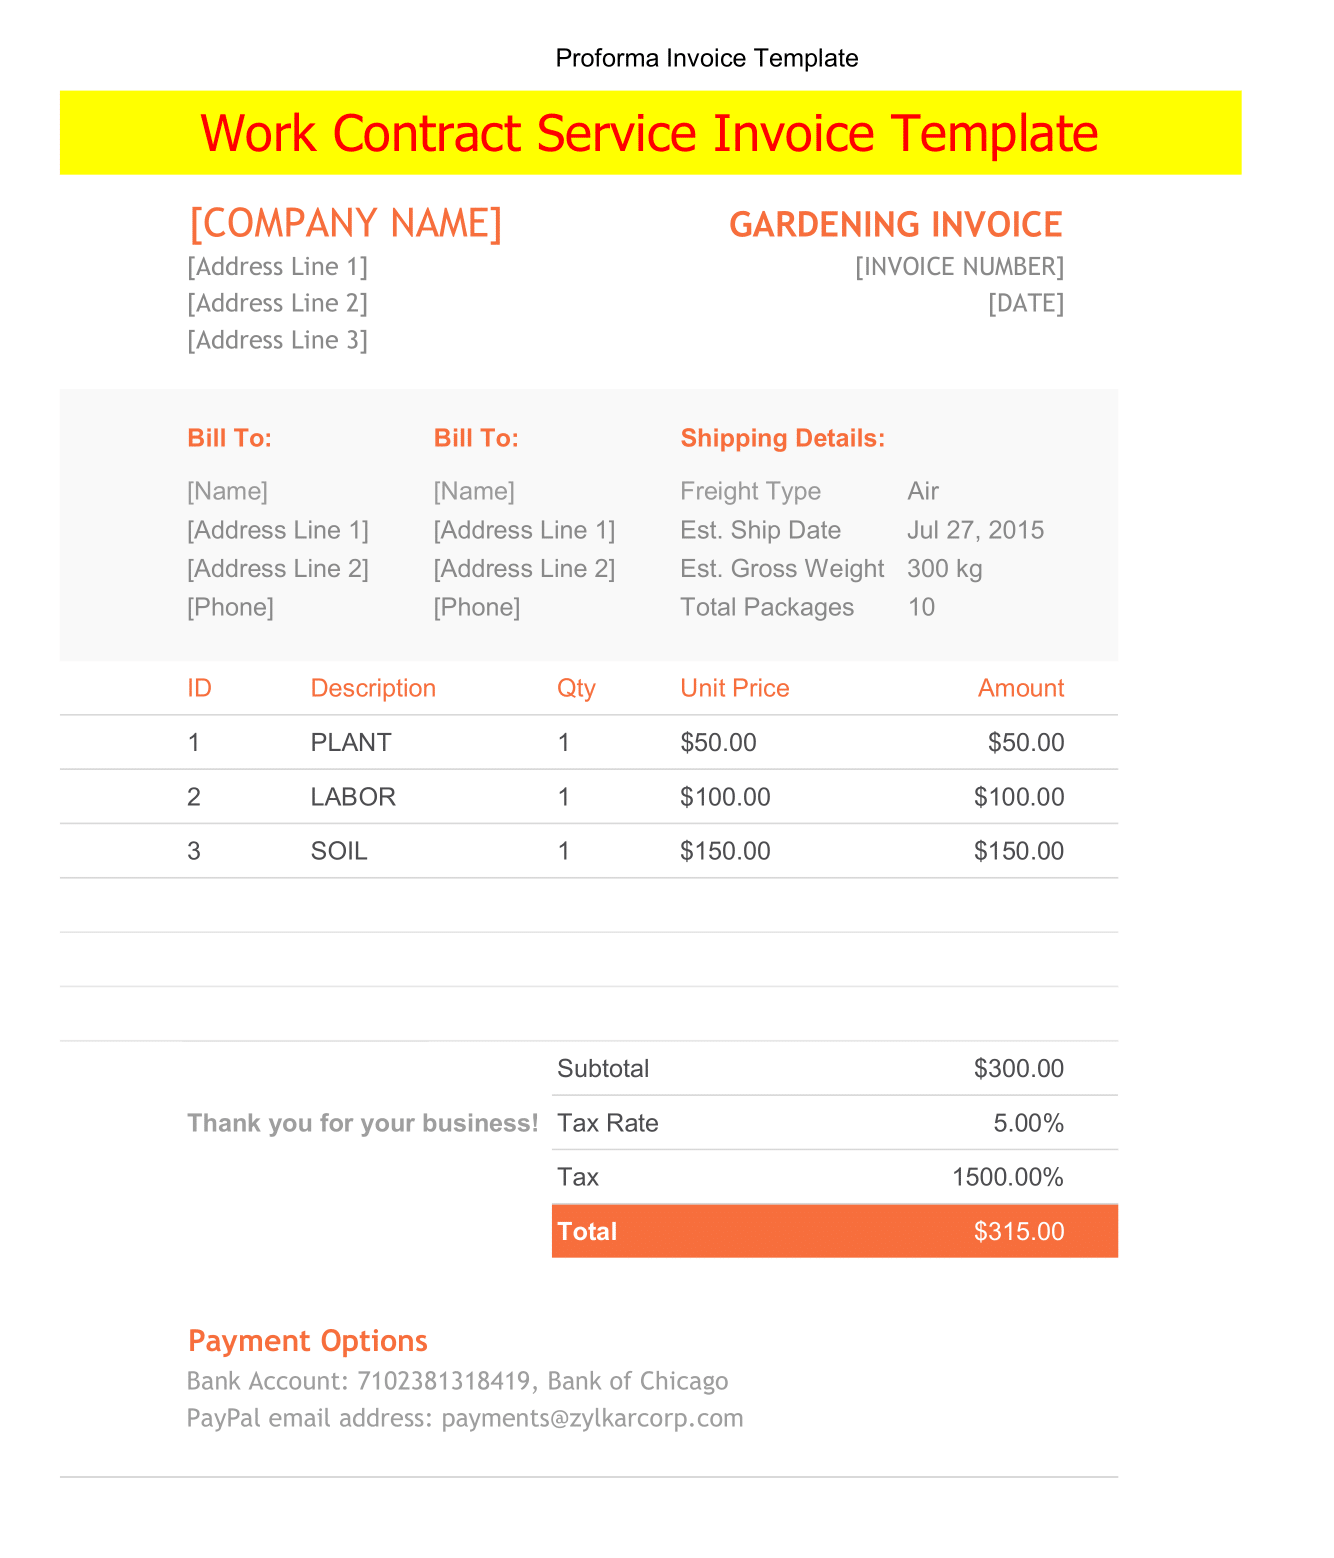 Work Contract Service Invoice Template